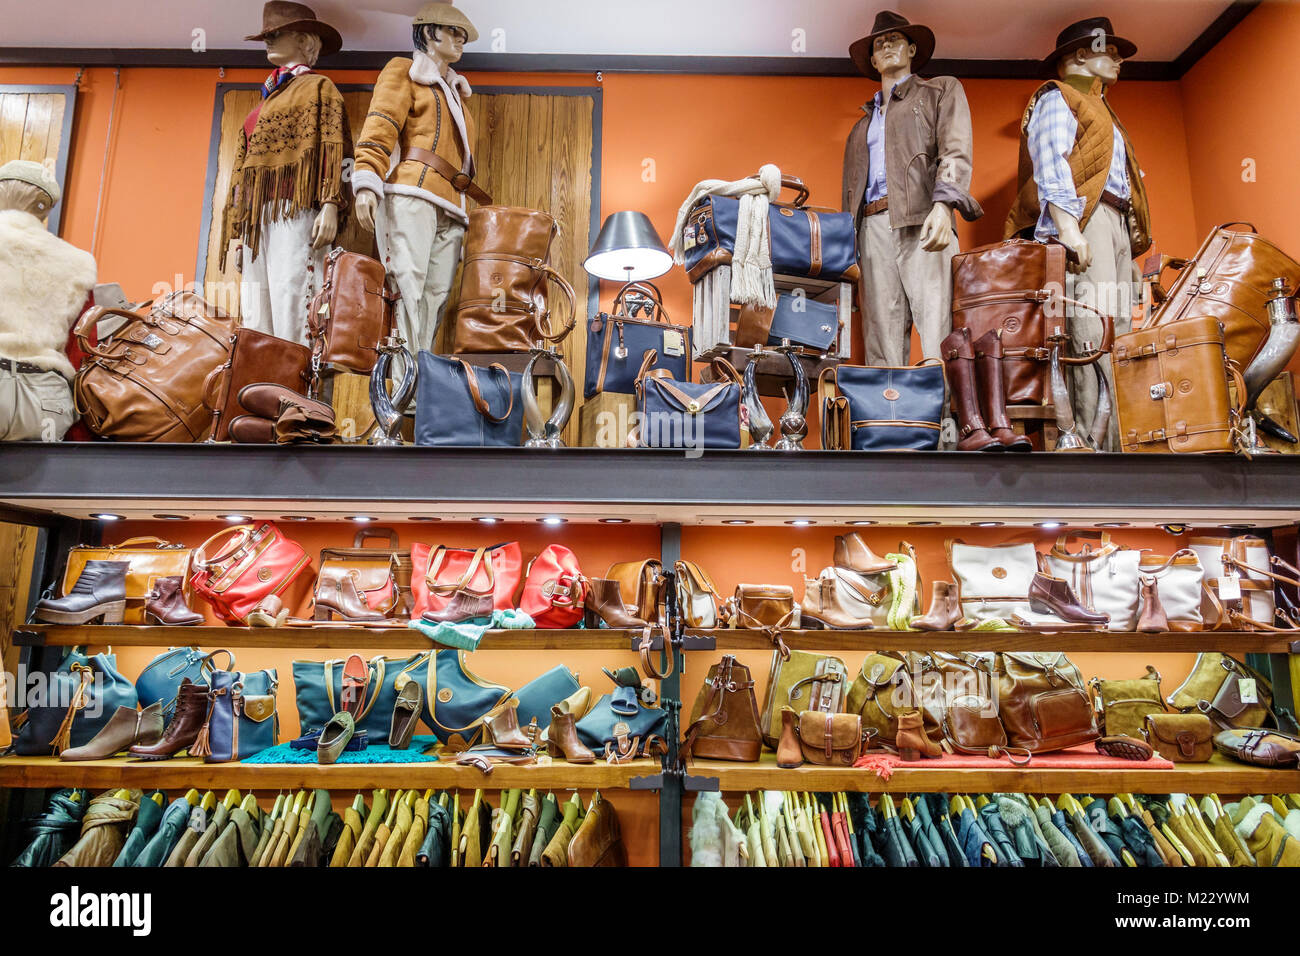 Buenos Aires Argentina,Galerias Pacifico mall,El Boyero,Argentine leather goods,handbag purse pocketbooks,travel bags,coats,display sale Argentinian A Stock Photo